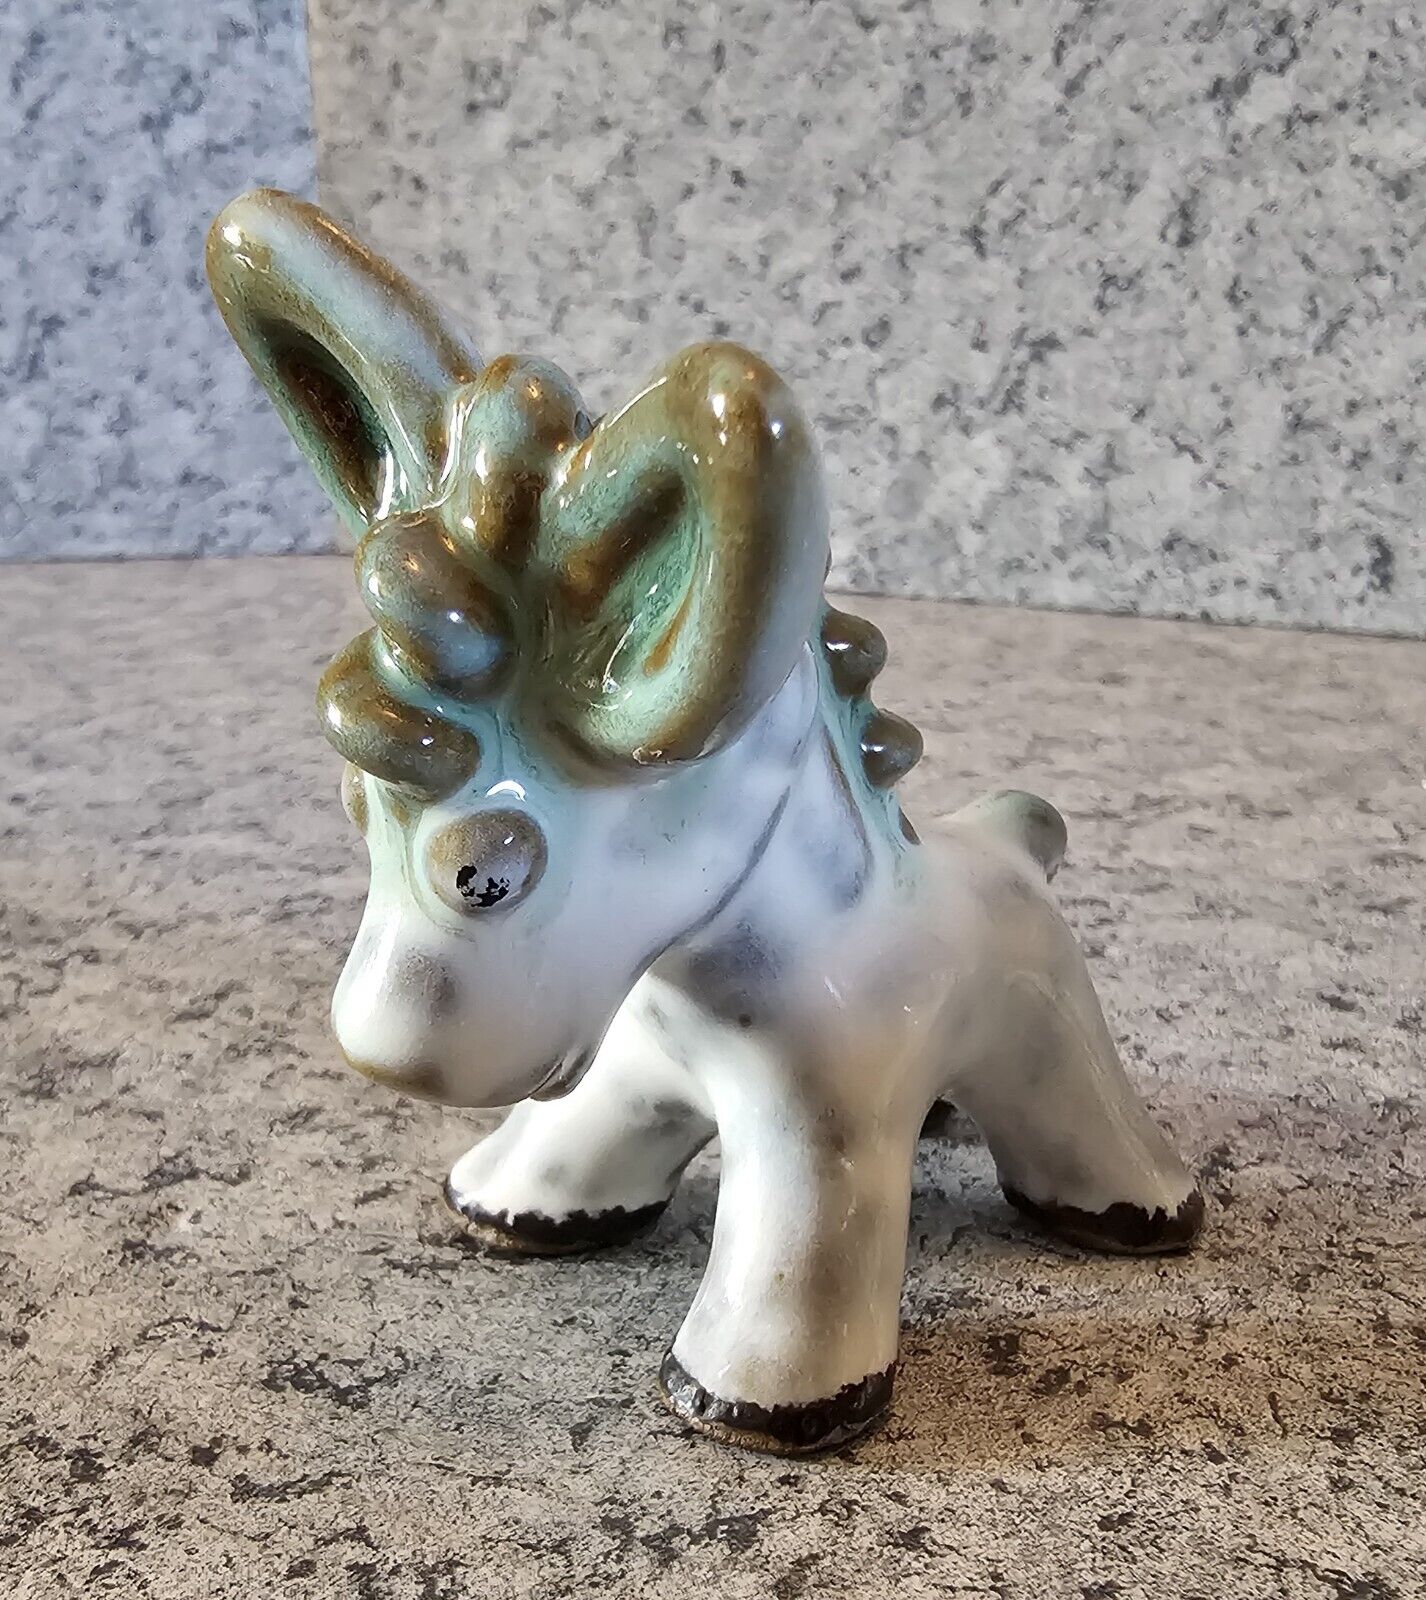 Vintage Ceramic Pottery White Donkey Japan Green Ears And Mane Bug Out Eyes